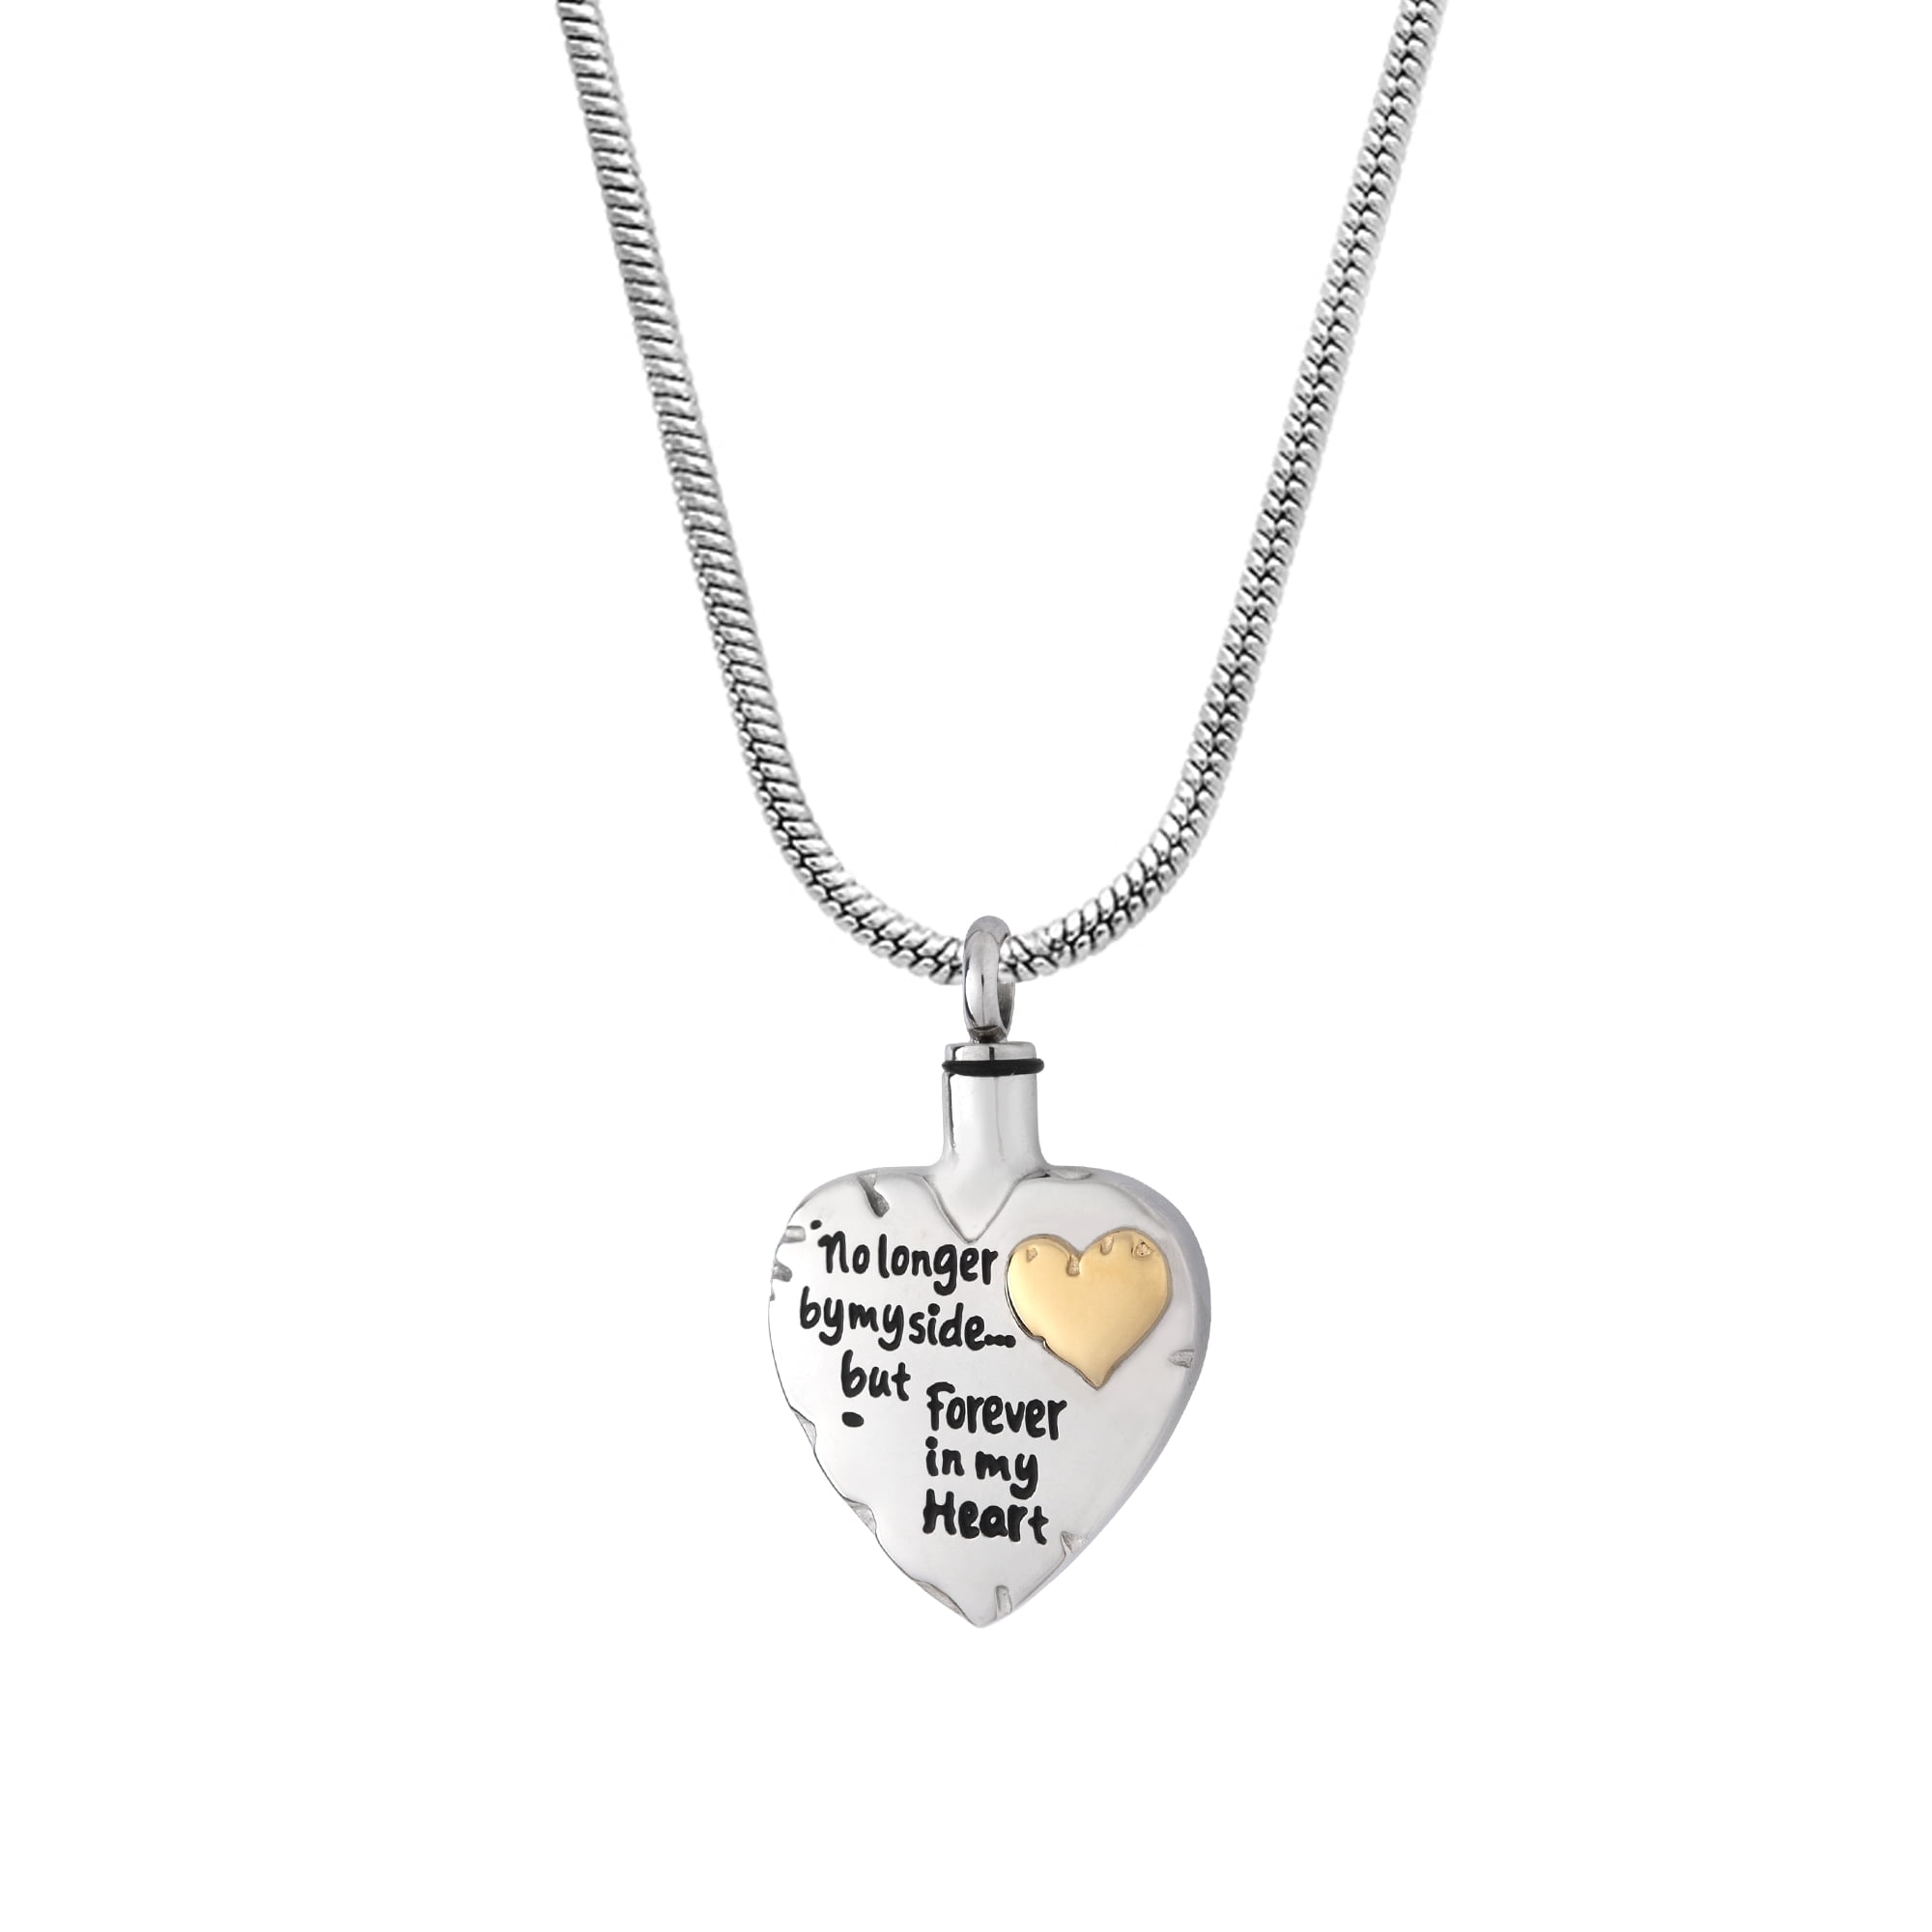 WK Teardrop Stainless Steel Always in My Heart Cremation Urn Necklace Pendant with Fill Kit Ashes Jewelry